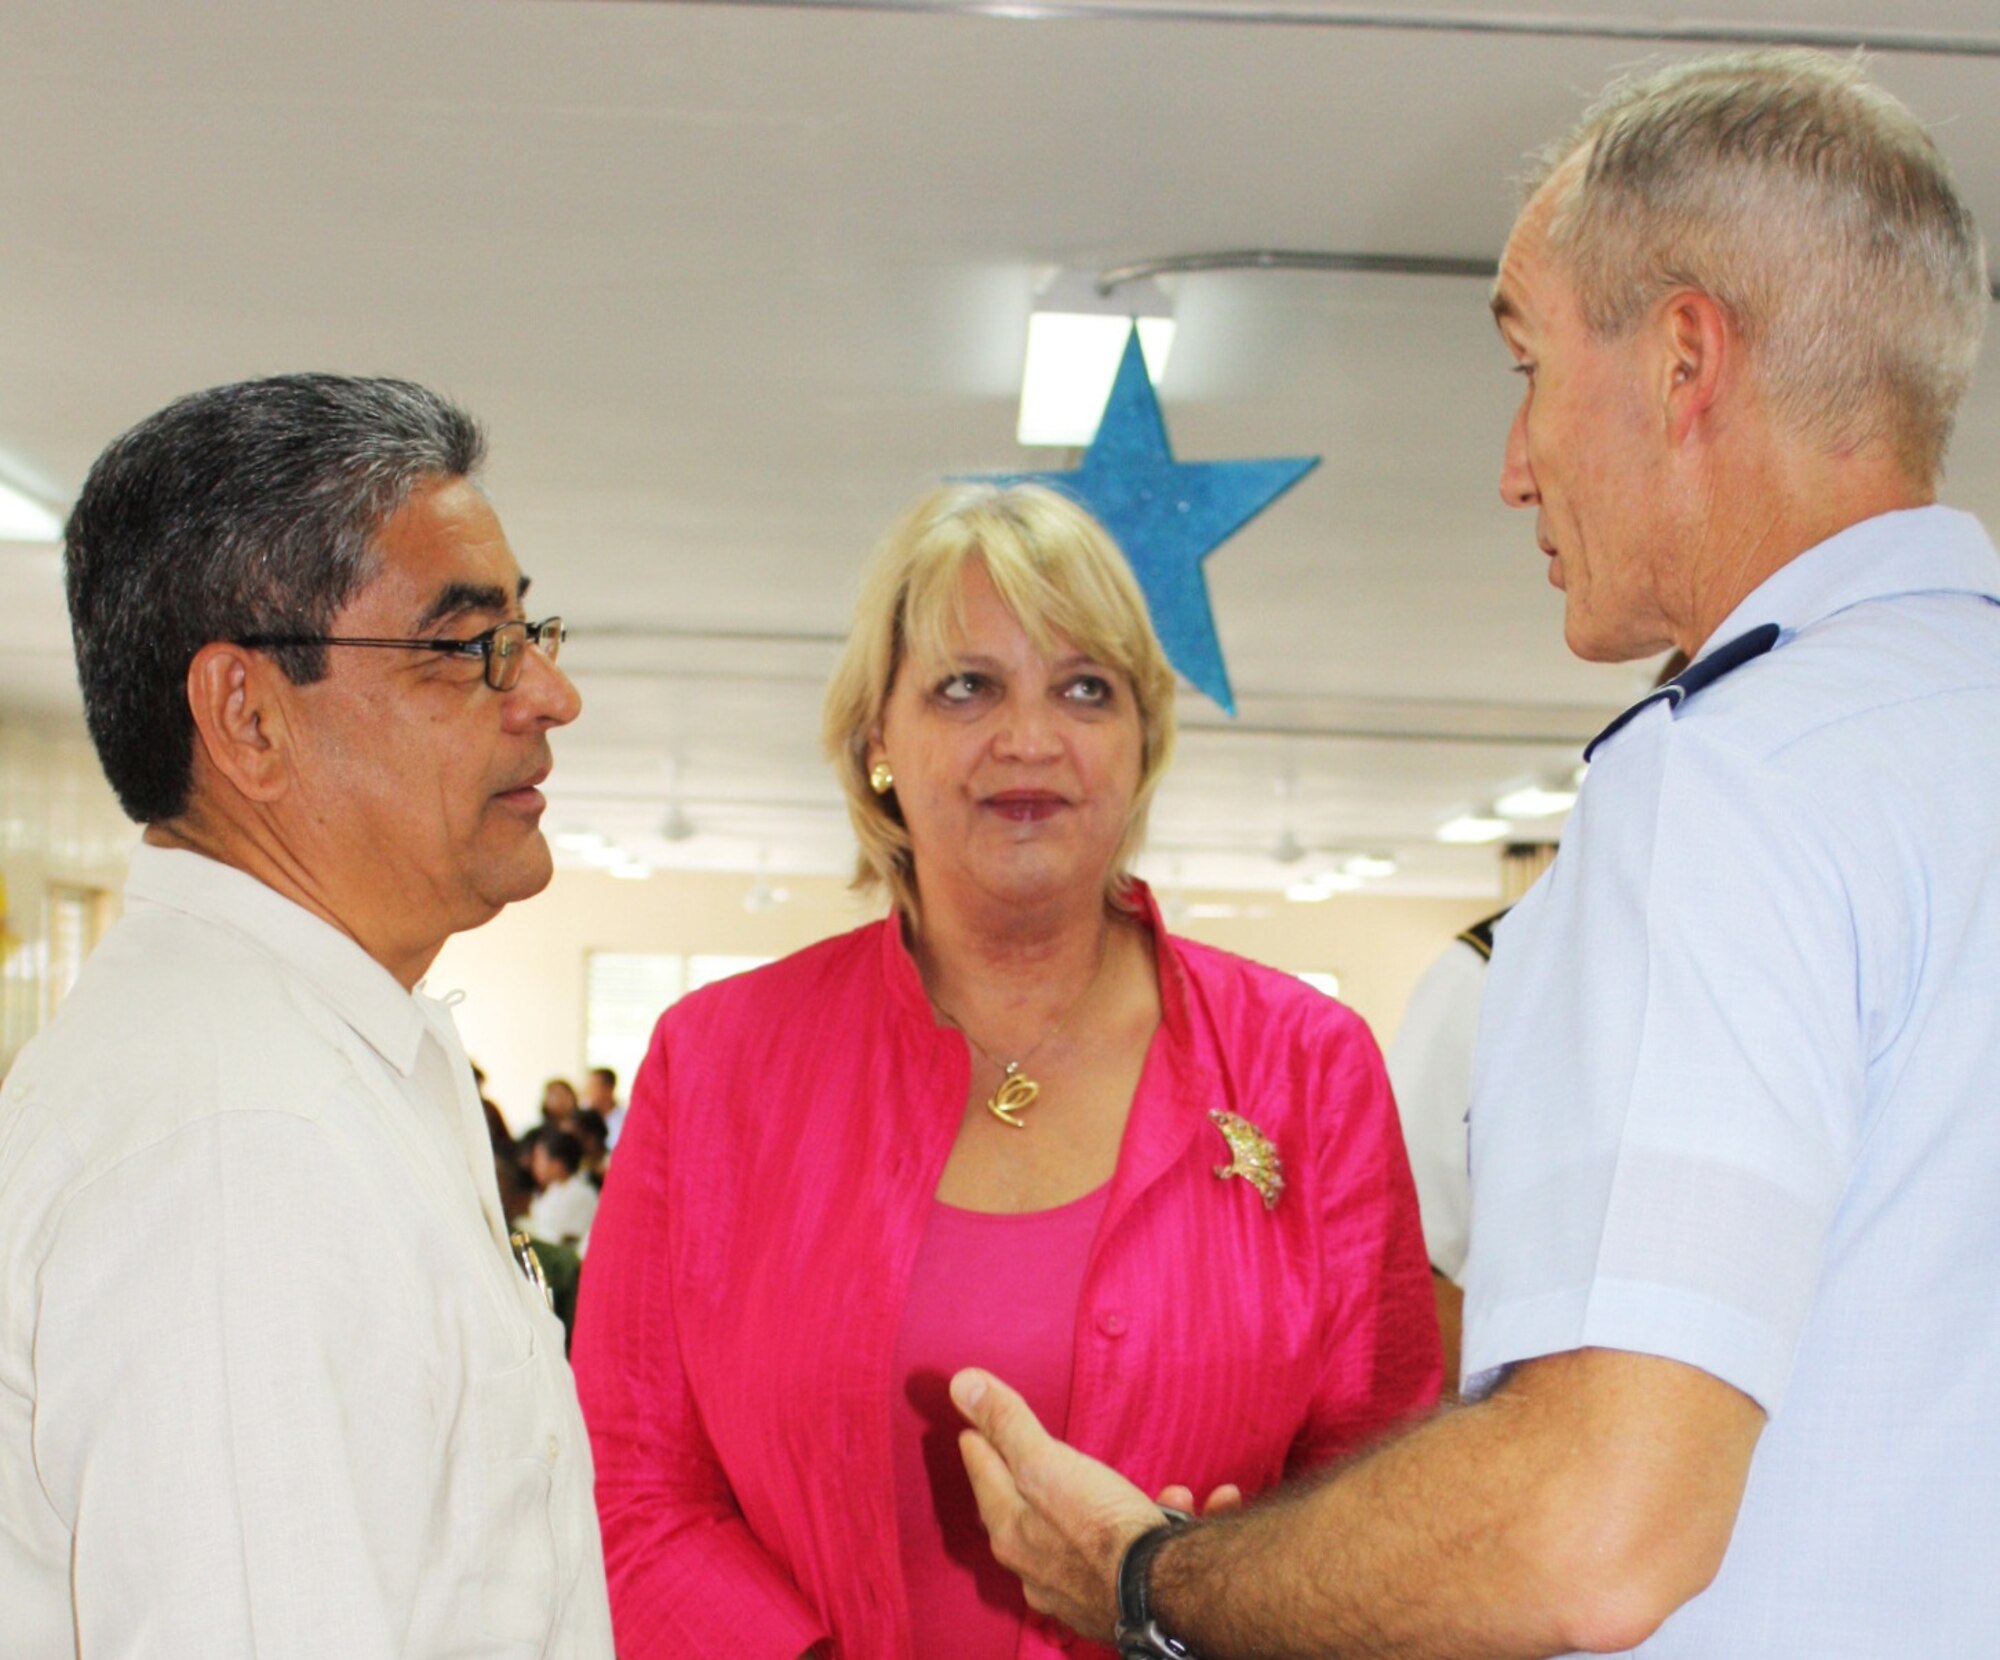 U.S. Air Force Col. Stuart Weinberger, right, Task Force Mahogany commander, speaks with Gaspar Vega, left, the deputy prime minister of Belize, and Margaret Hawthorne, the U.S. Embassy’s chargé d’affaires, during the closing ceremonies of New Horizons at Trial Farm Government School June 28, 2013. New Horizons is a training exercise led by U.S. Southern Command that provided medical treatment as well as constructed several classrooms throughout Belize. (Courtesy photo)